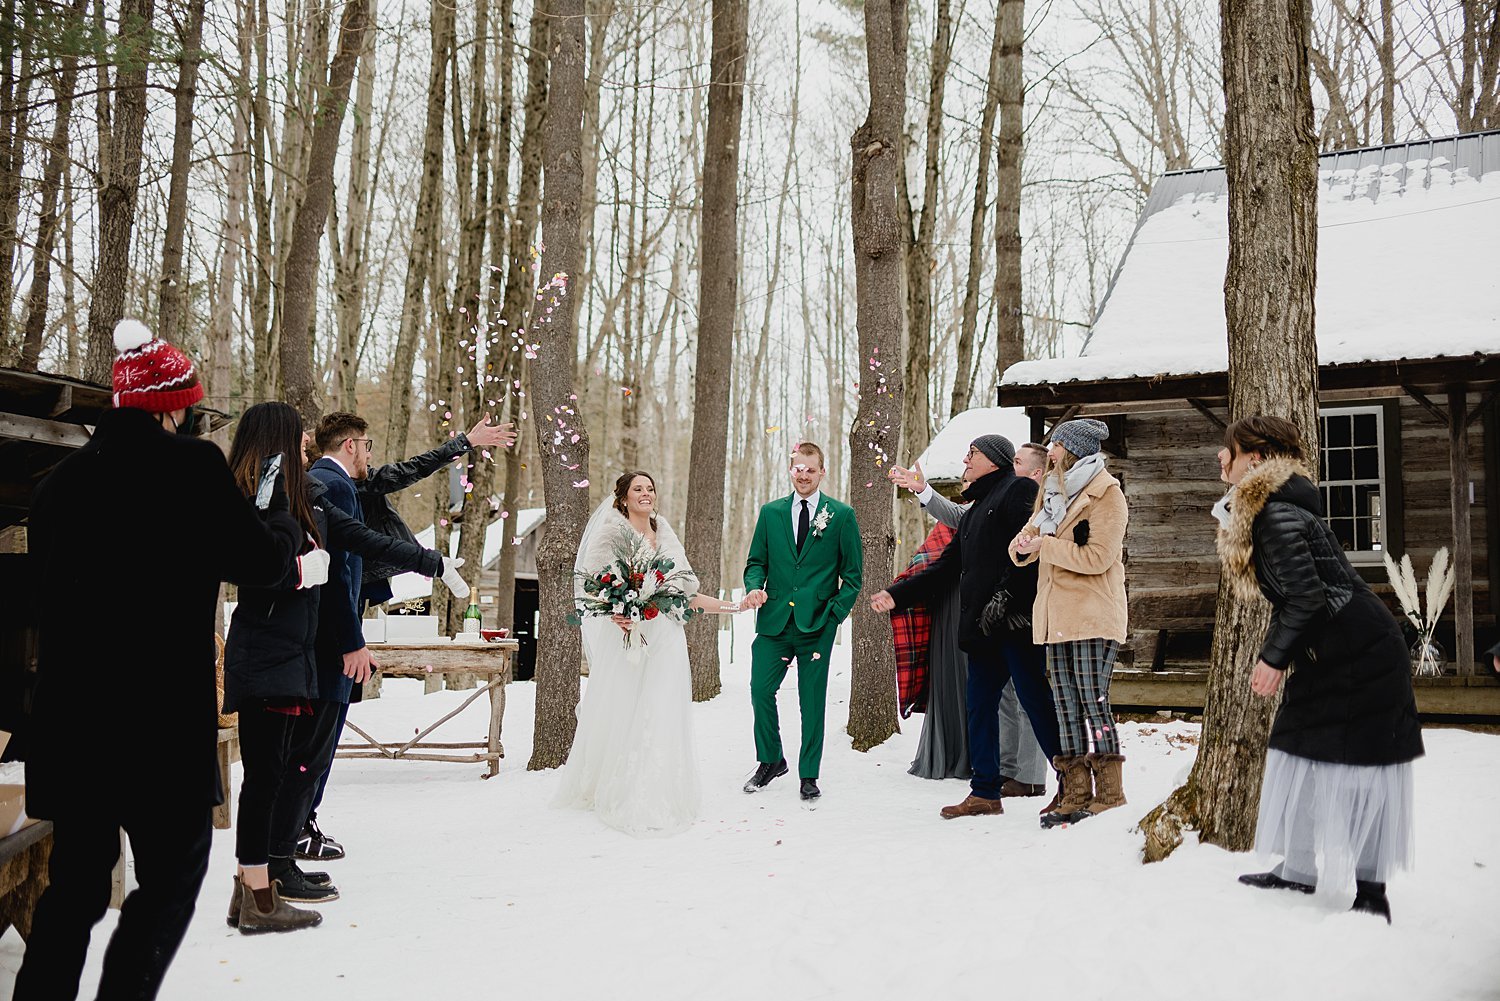 Intimate Winter Elopement at O'Hara Mill Homestead in Madoc, Ontario | Prince Edward County Wedding Photographer | Holly McMurter Photographs_0024.jpg